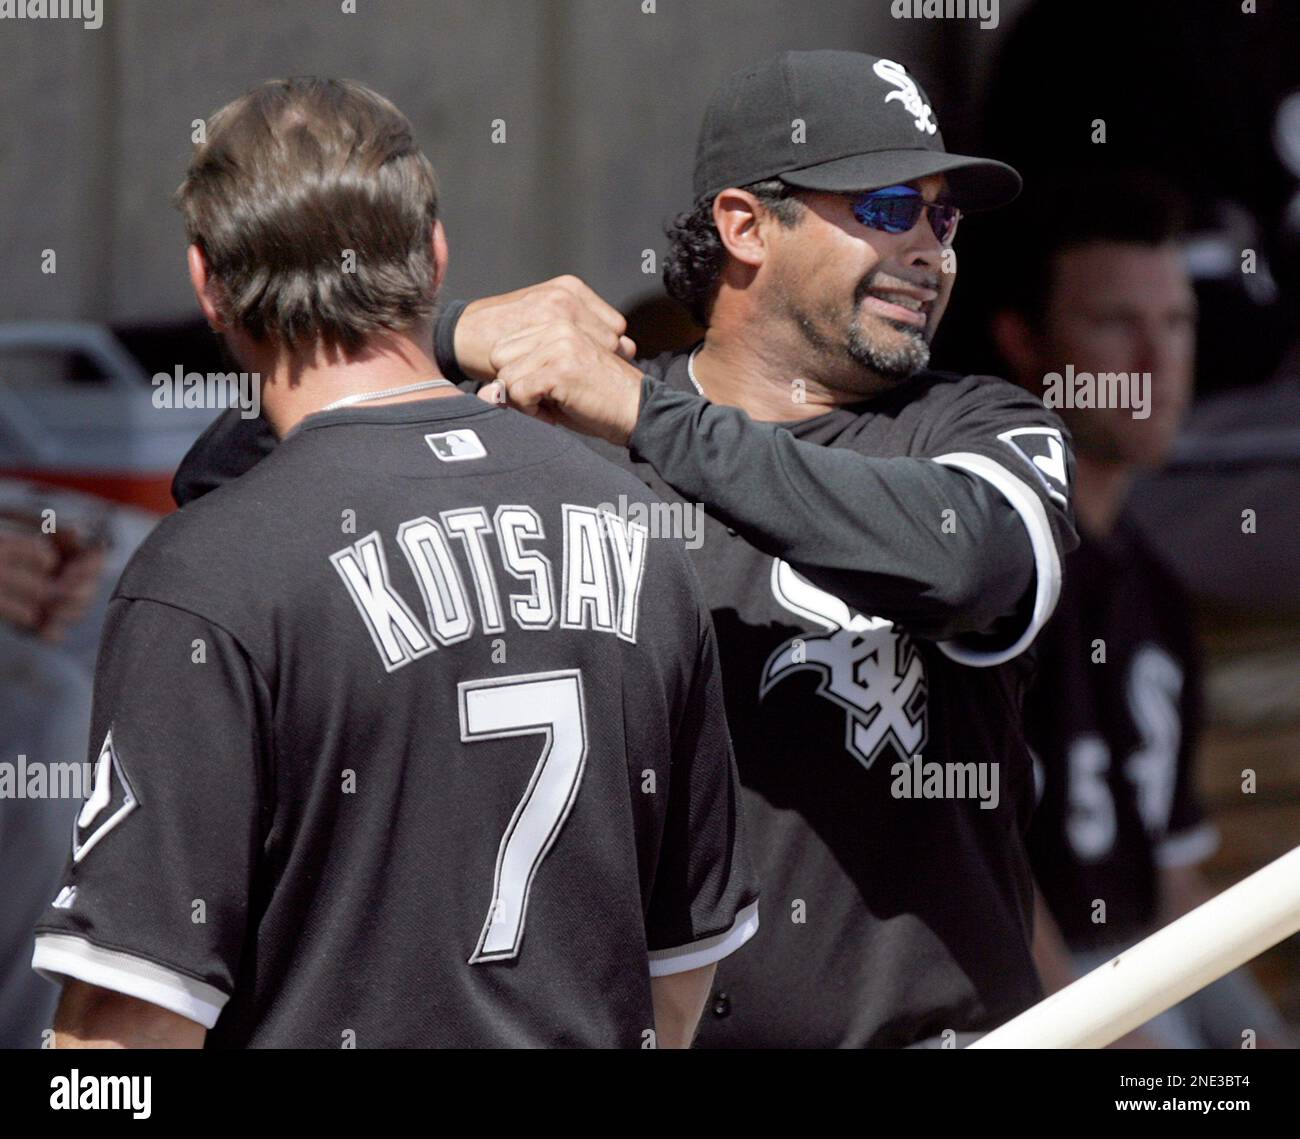 Chicago White Sox manager Ozzie Guillen, right, demonstrates a